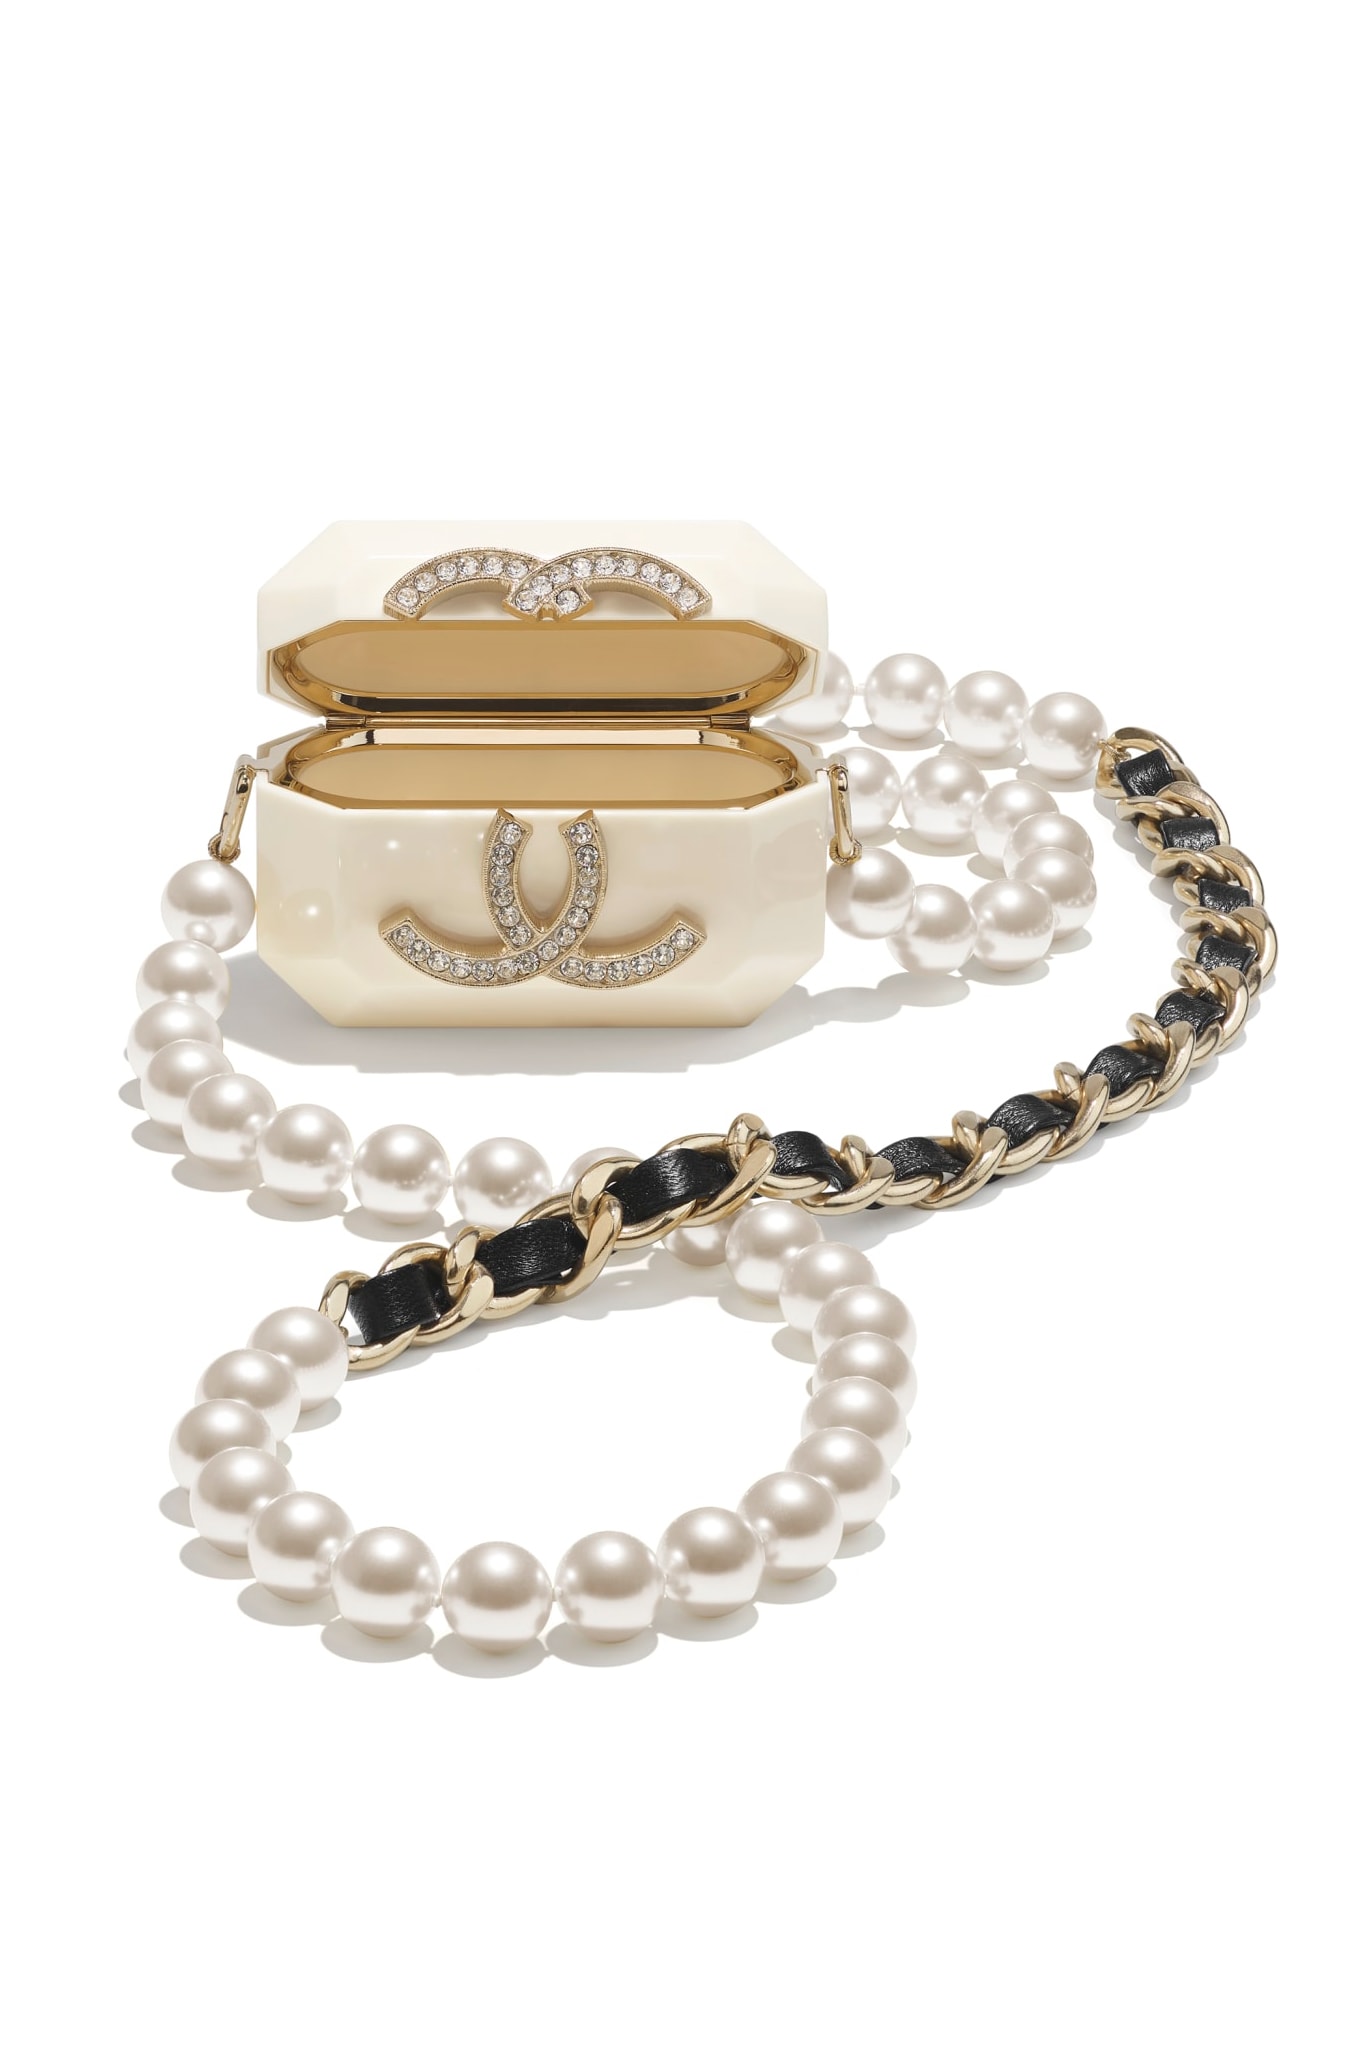 pearl necklace with chanel charm